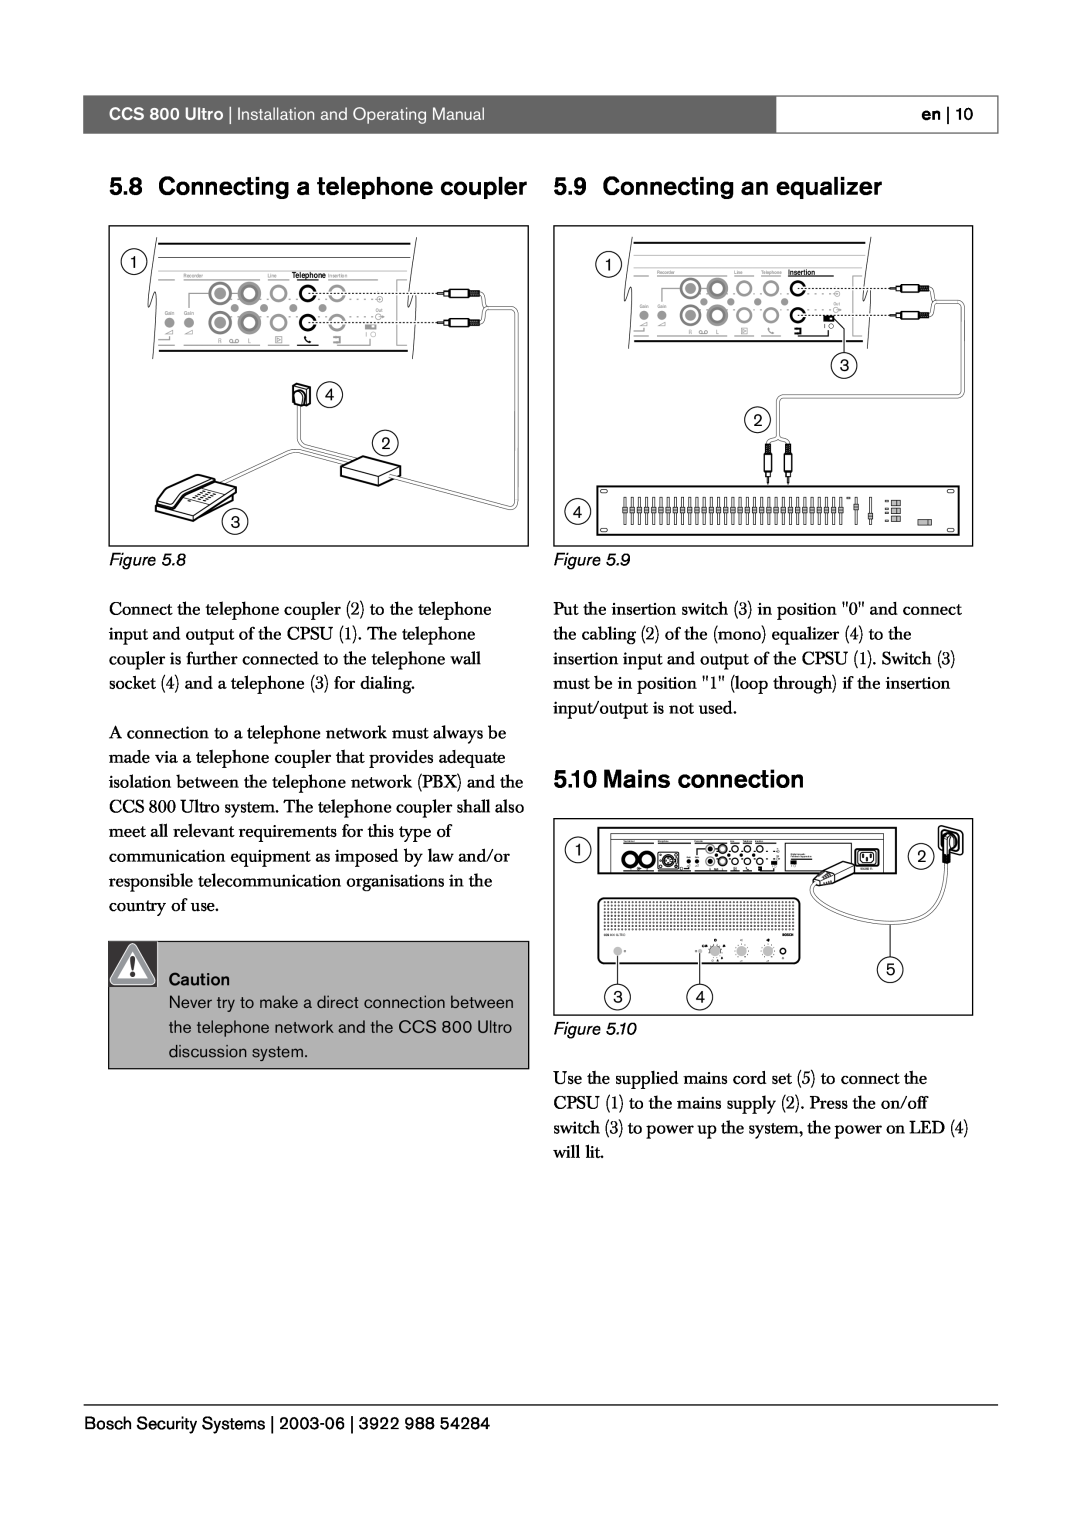 Bosch Appliances manual Mains connection, CCS 800 Ultro Installation and Operating Manual, en, Bosch Security Systems 